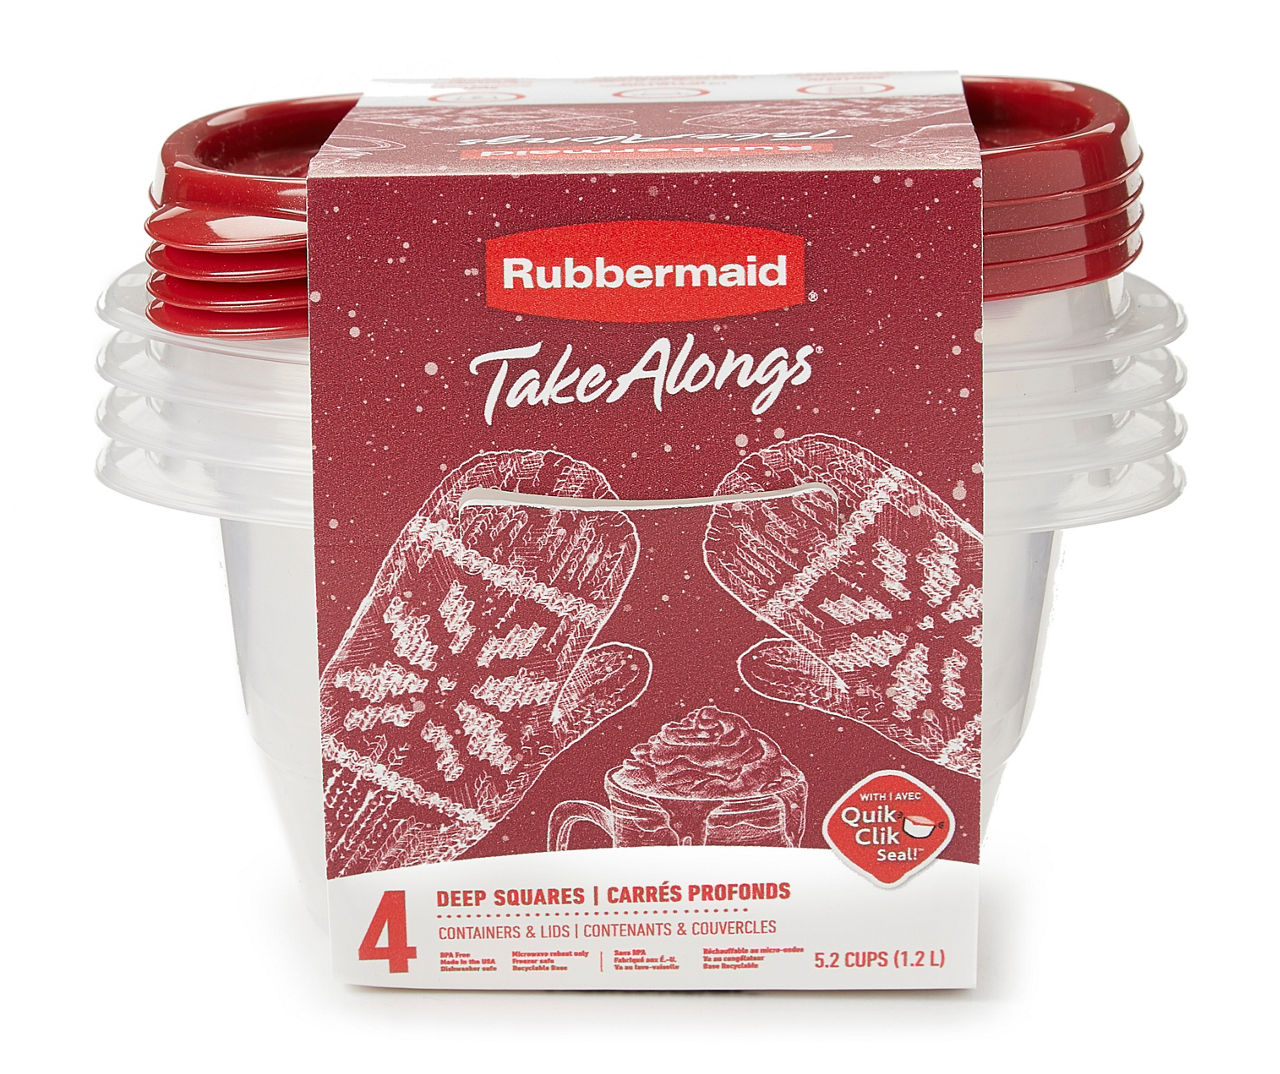 Rubbermaid TakeAlongs Containers + Lids, Deep Square - 2 containers + lids